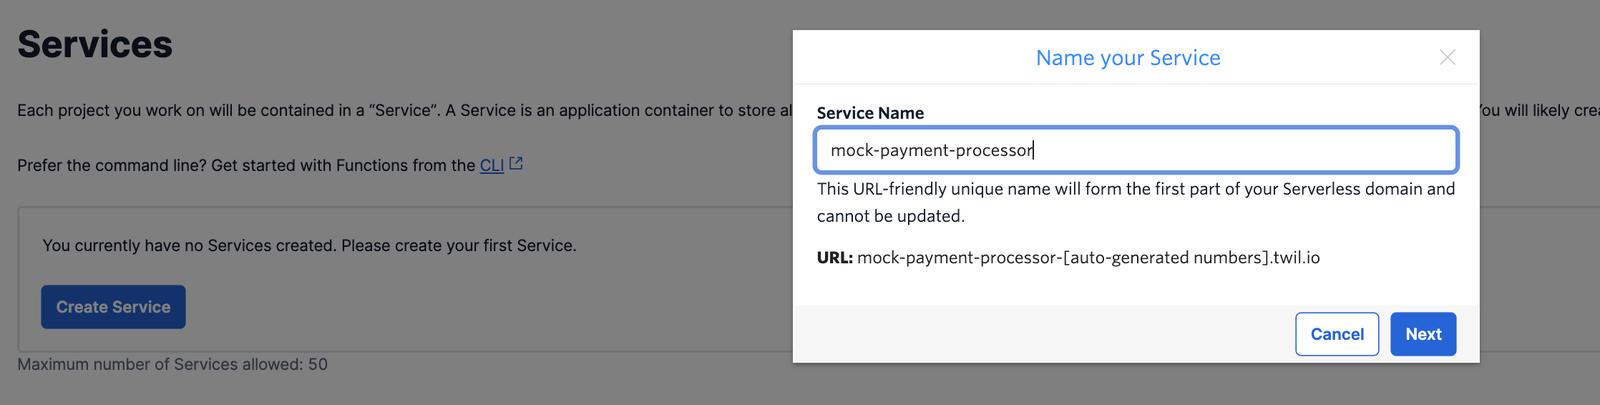 Give Twilio Serverless Service the name 'mock-payment-processor' in the Console.